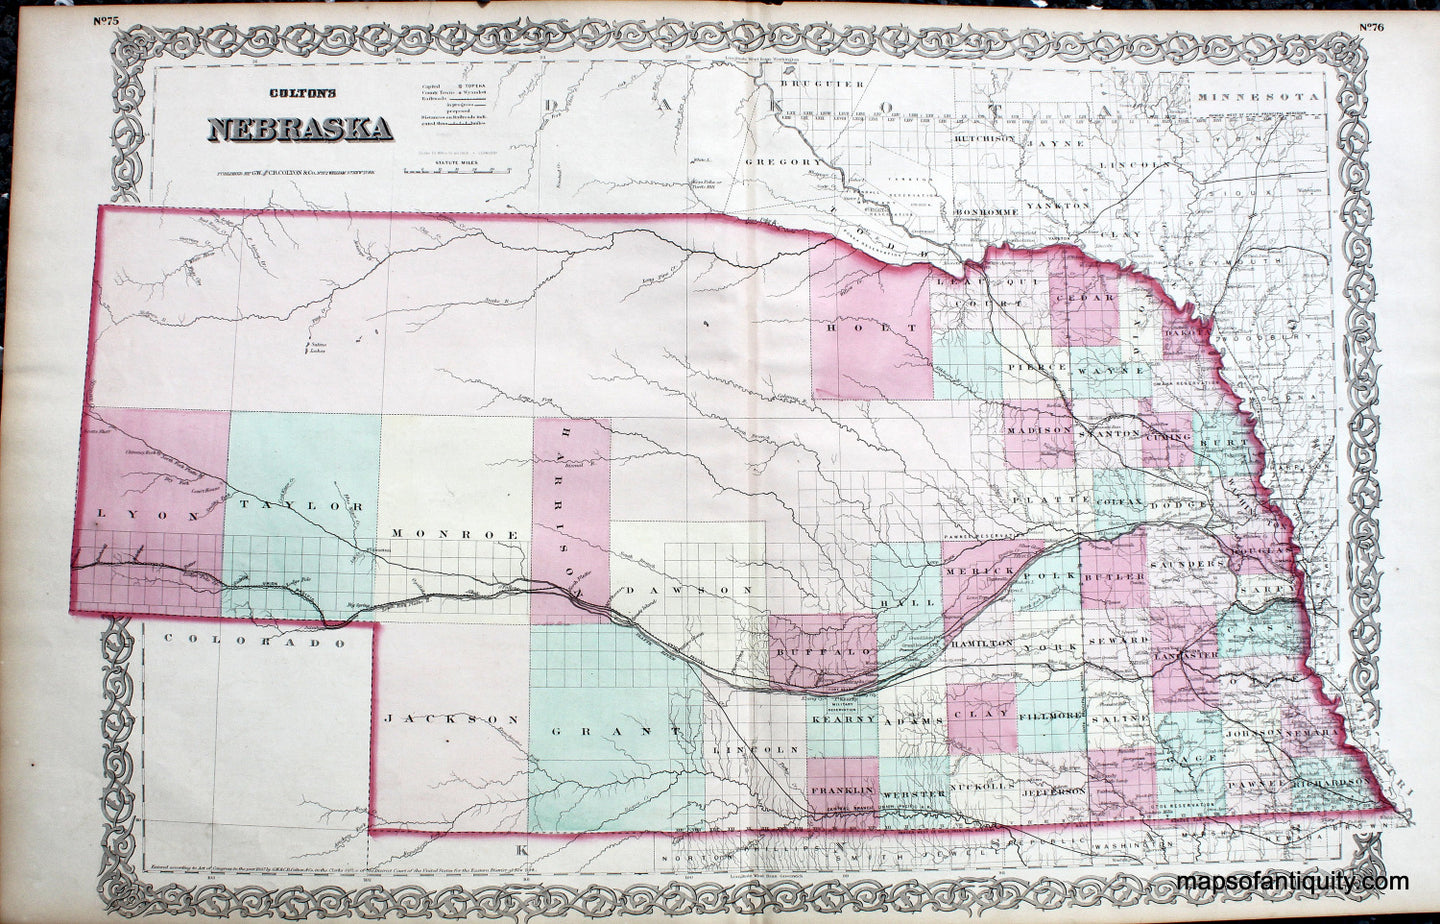 Antique-Hand-Colored-Map-Colton's-Nebraska-**********-United-States-Midwest-1867-Colton-Maps-Of-Antiquity